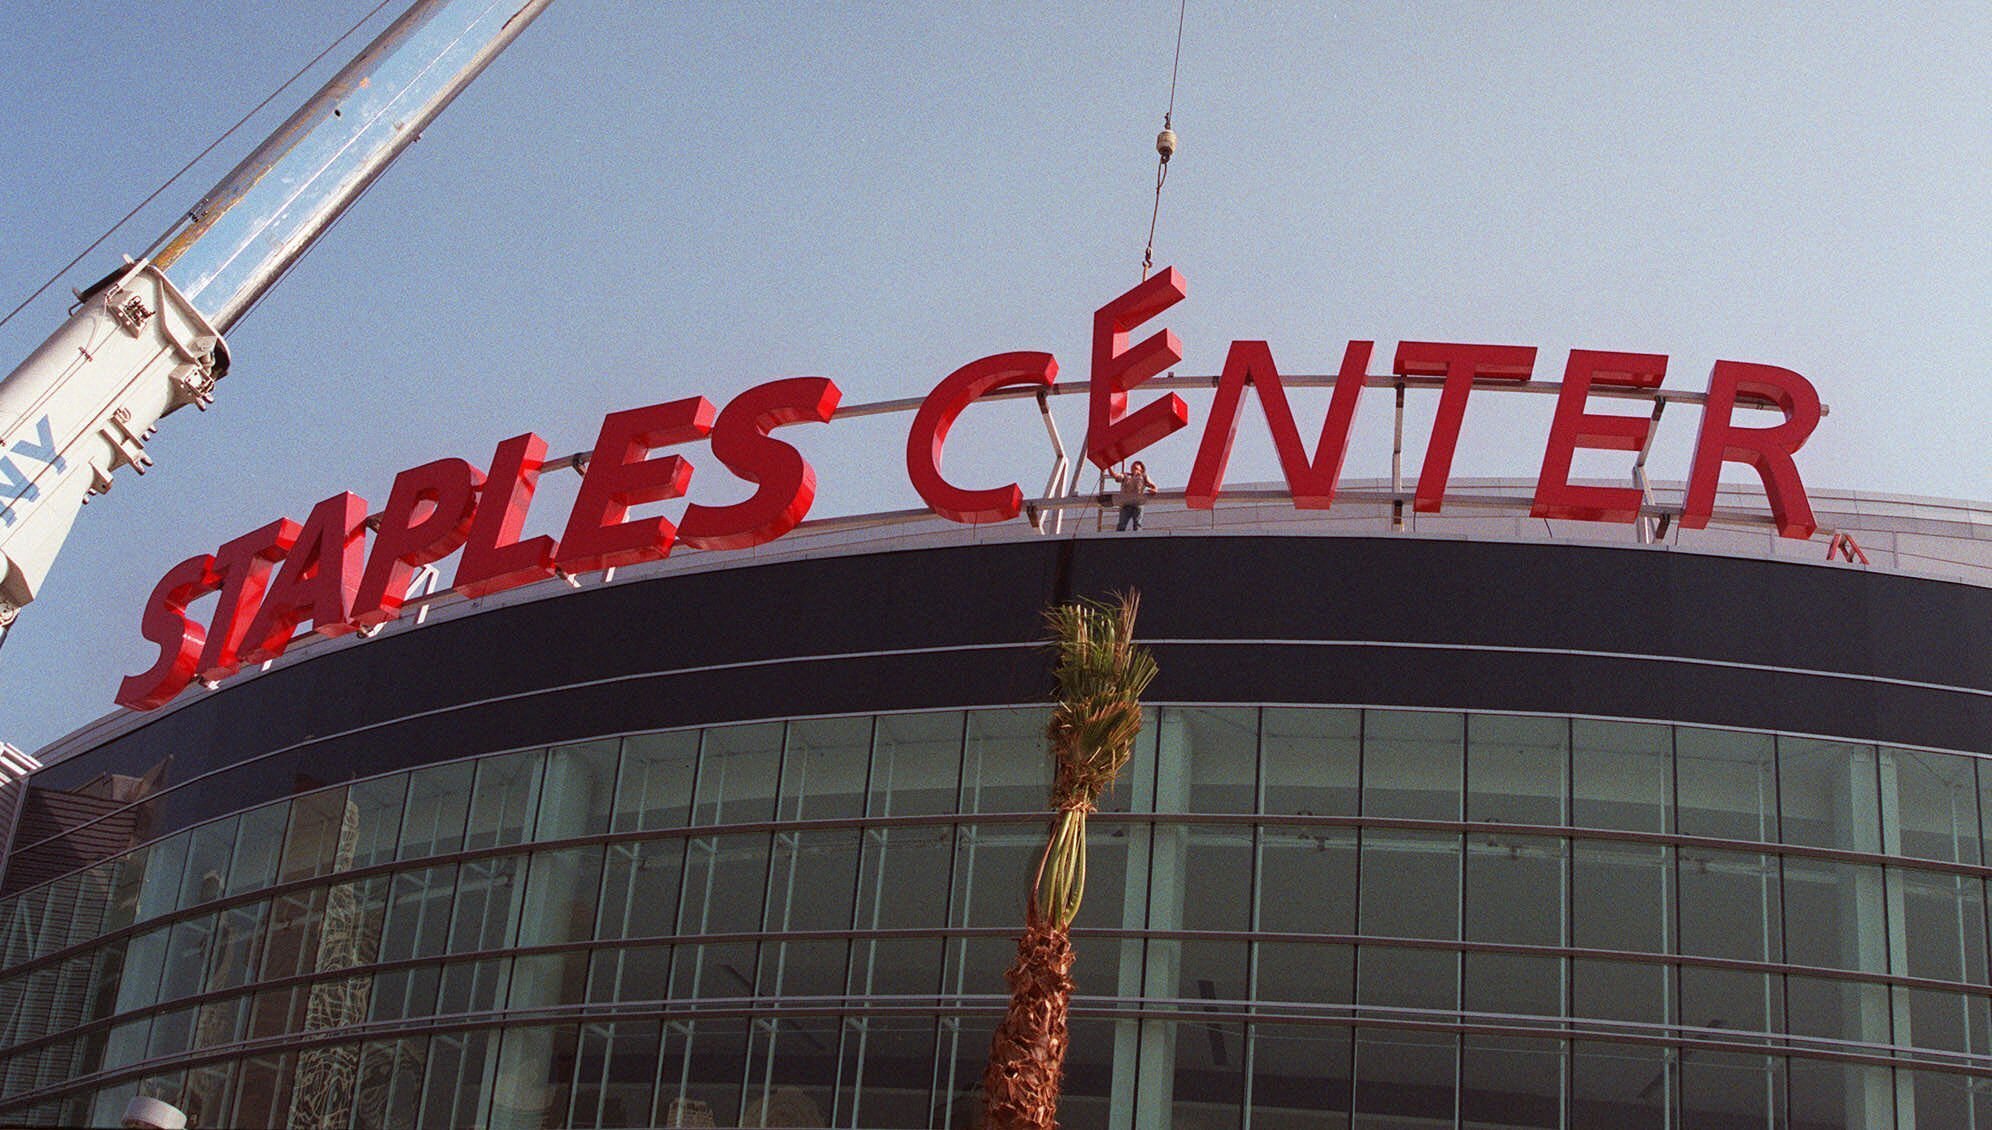 FILE - Construction workers put the finishing touches on the Staples Center sign outside the arena in downtown Los Angeles on Thursday, Sept. 16, 1999. Staples Center is getting a new name. Starting Christmas Day, it will be Crypto.com Arena. The downtown Los Angeles home of the NBA's Lakers and Clippers, the NHL's Kings and the WNBA's Sparks will change its name after 22 years of operation, arena owner AEG announced Tuesday night, Nov. 16, 2021. (AP Photo/Xerro Ryan Covarrubias, File)